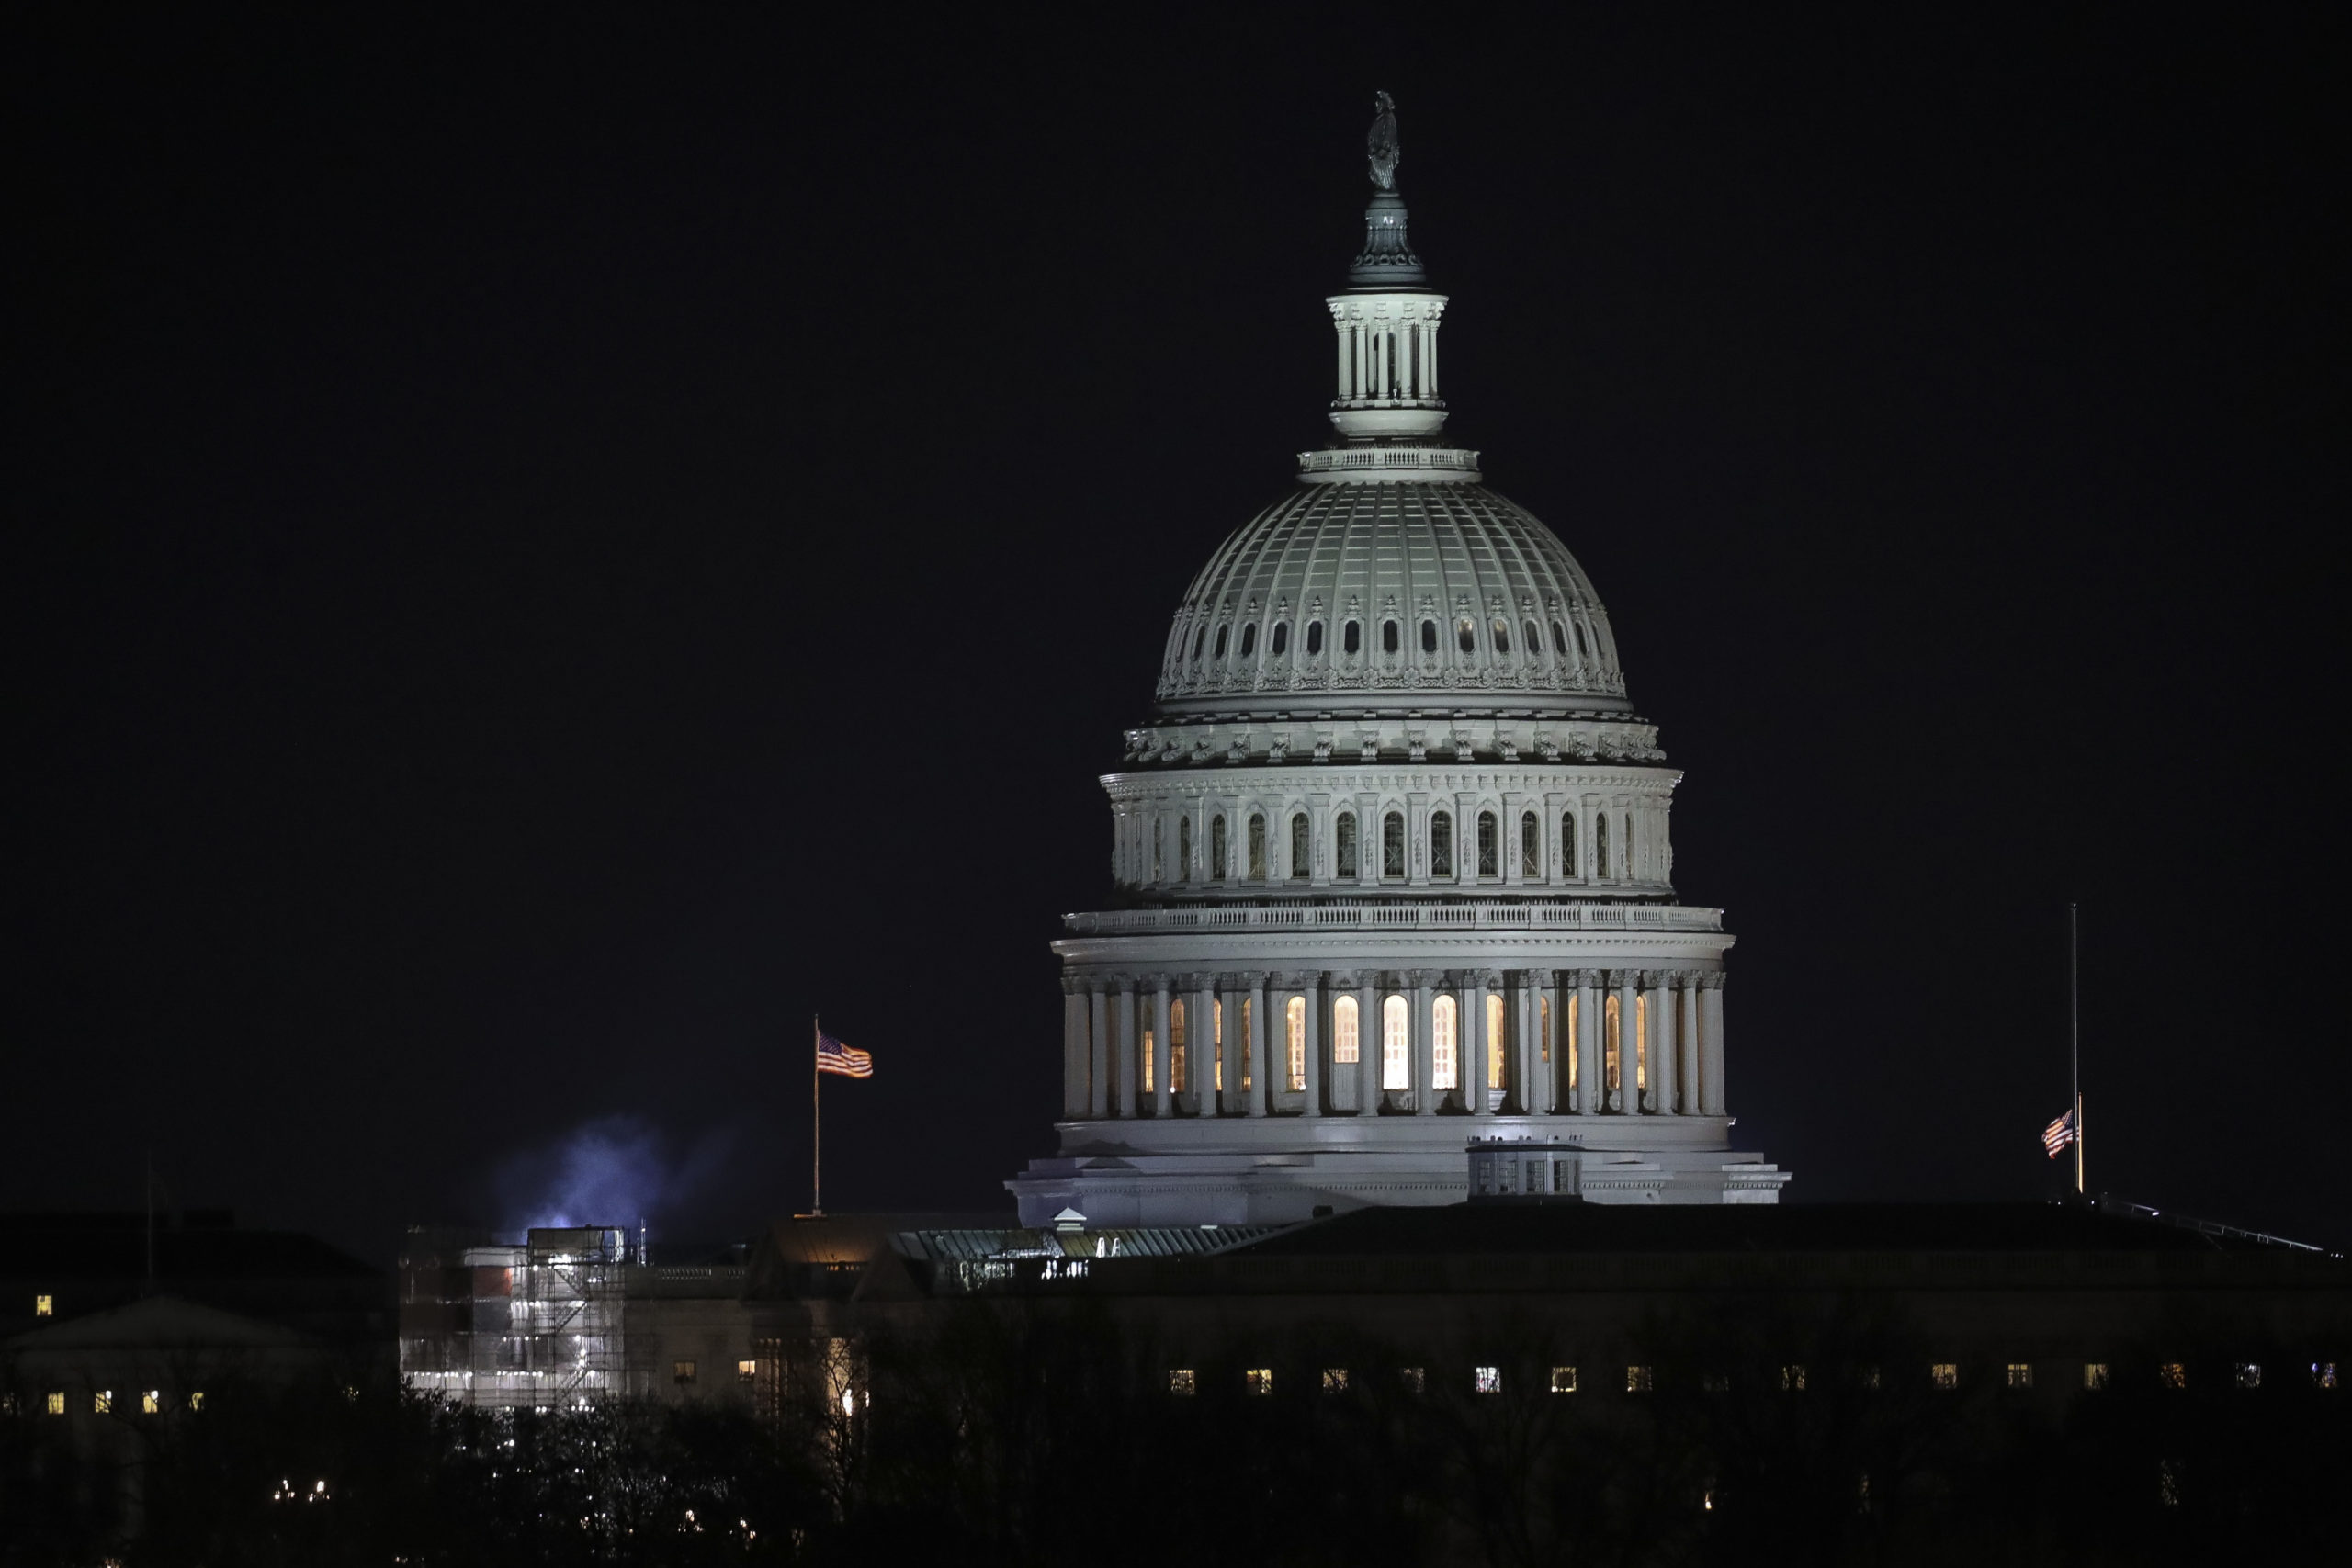 WASHINGTON, DC - DECEMBER 12: The U.S. Capitol dome stands after dark as a House Judiciary Committee markup hearing continues on the articles of impeachment against U.S. President Donald Trump in the Longworth House Office Building on Capitol Hill December 12, 2019 in Washington, DC. The articles of impeachment charge Trump with abuse of power and obstruction of Congress. House Democrats claim that Trump posed a 'clear and present danger' to national security and the 2020 election in his dealings with Ukraine over the past year. (Photo by Drew Angerer/Getty Images)